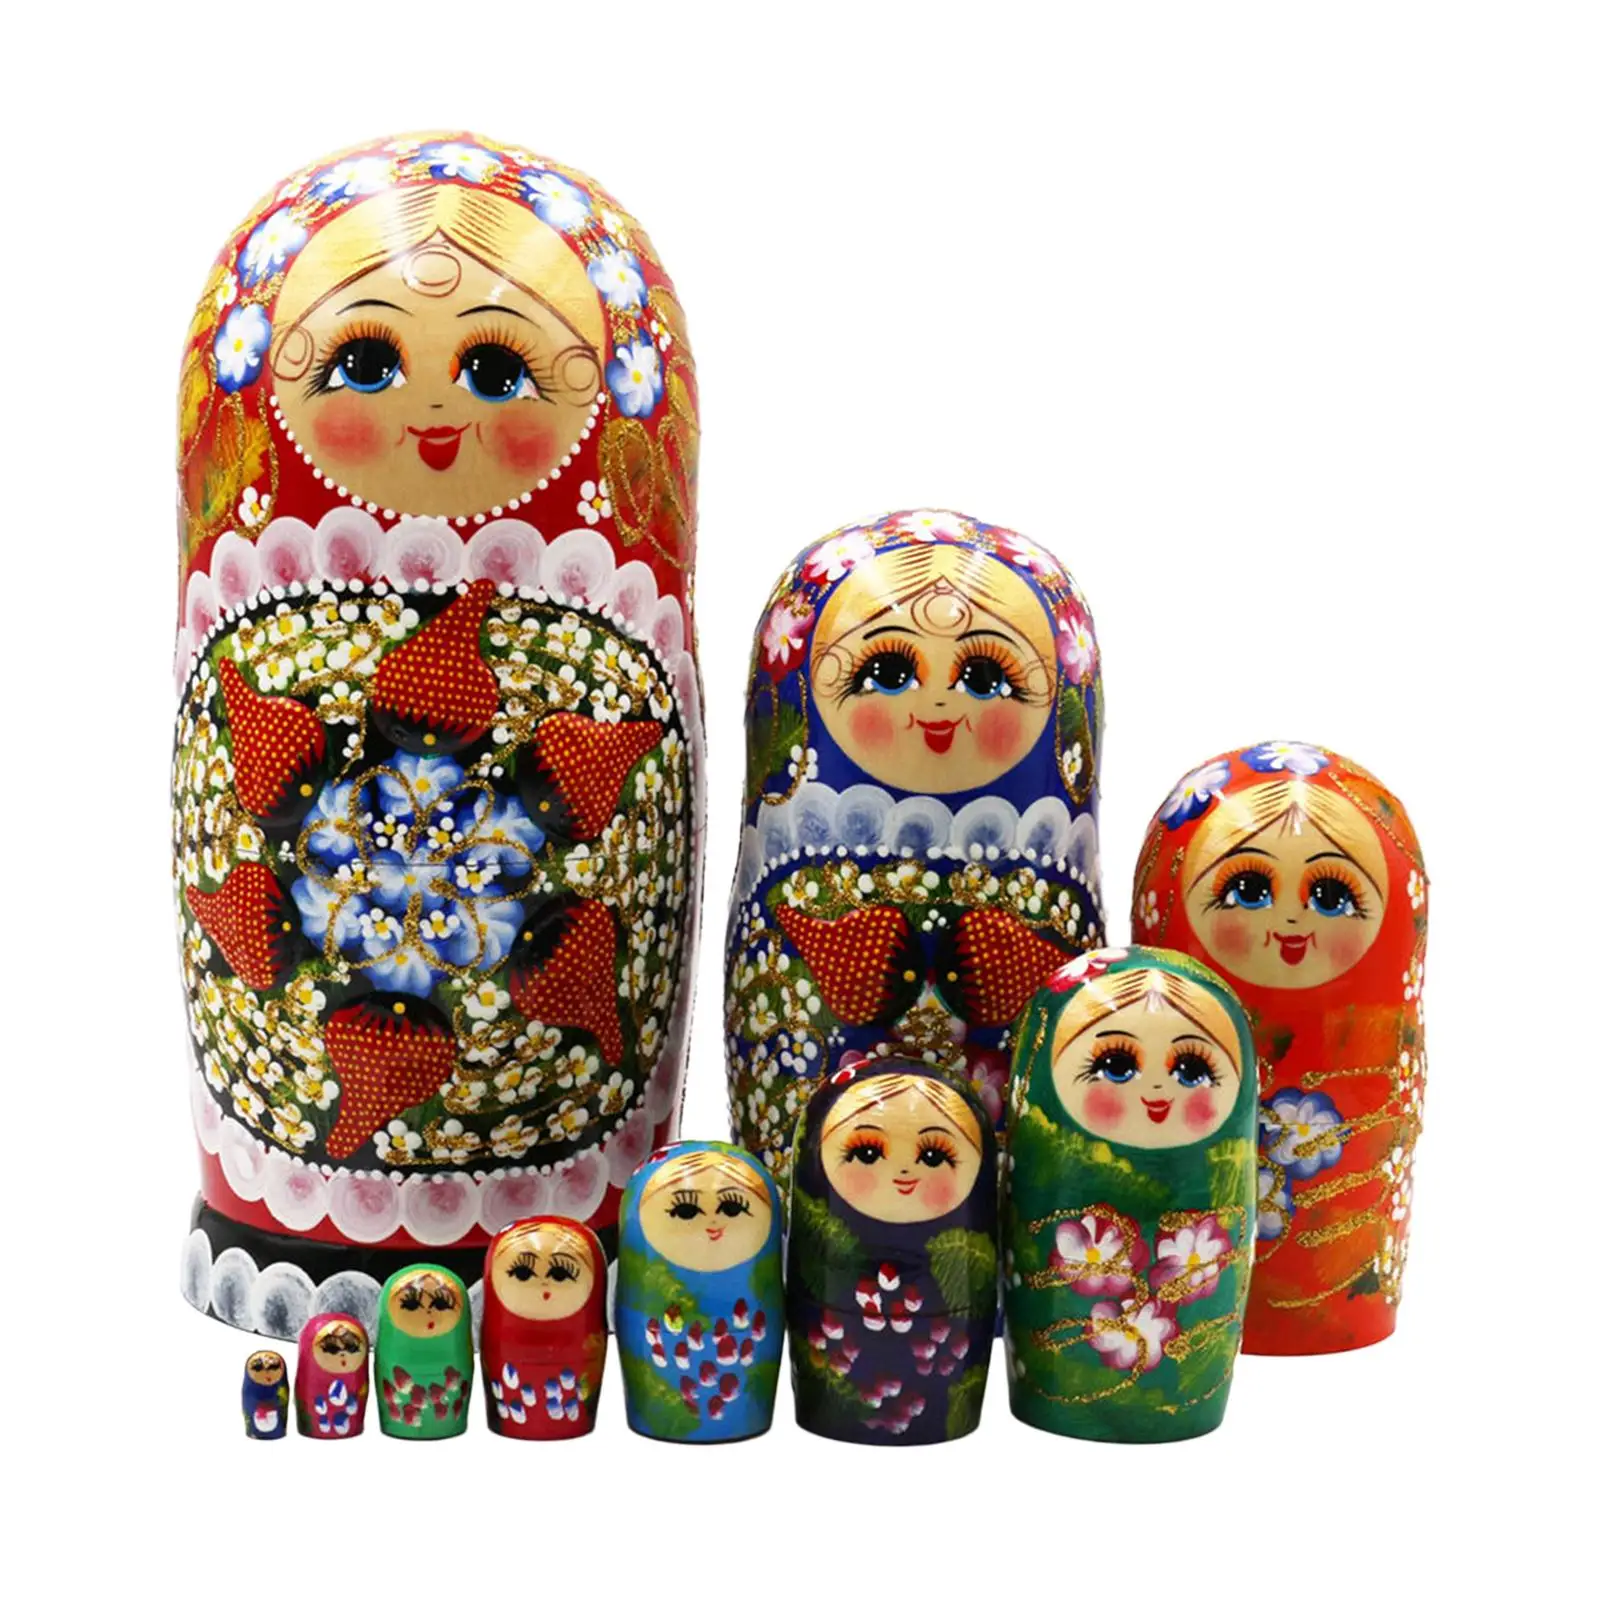 10x Nesting Doll Toy Desk Birthday Gifts Tabletop Handpainted Decoration